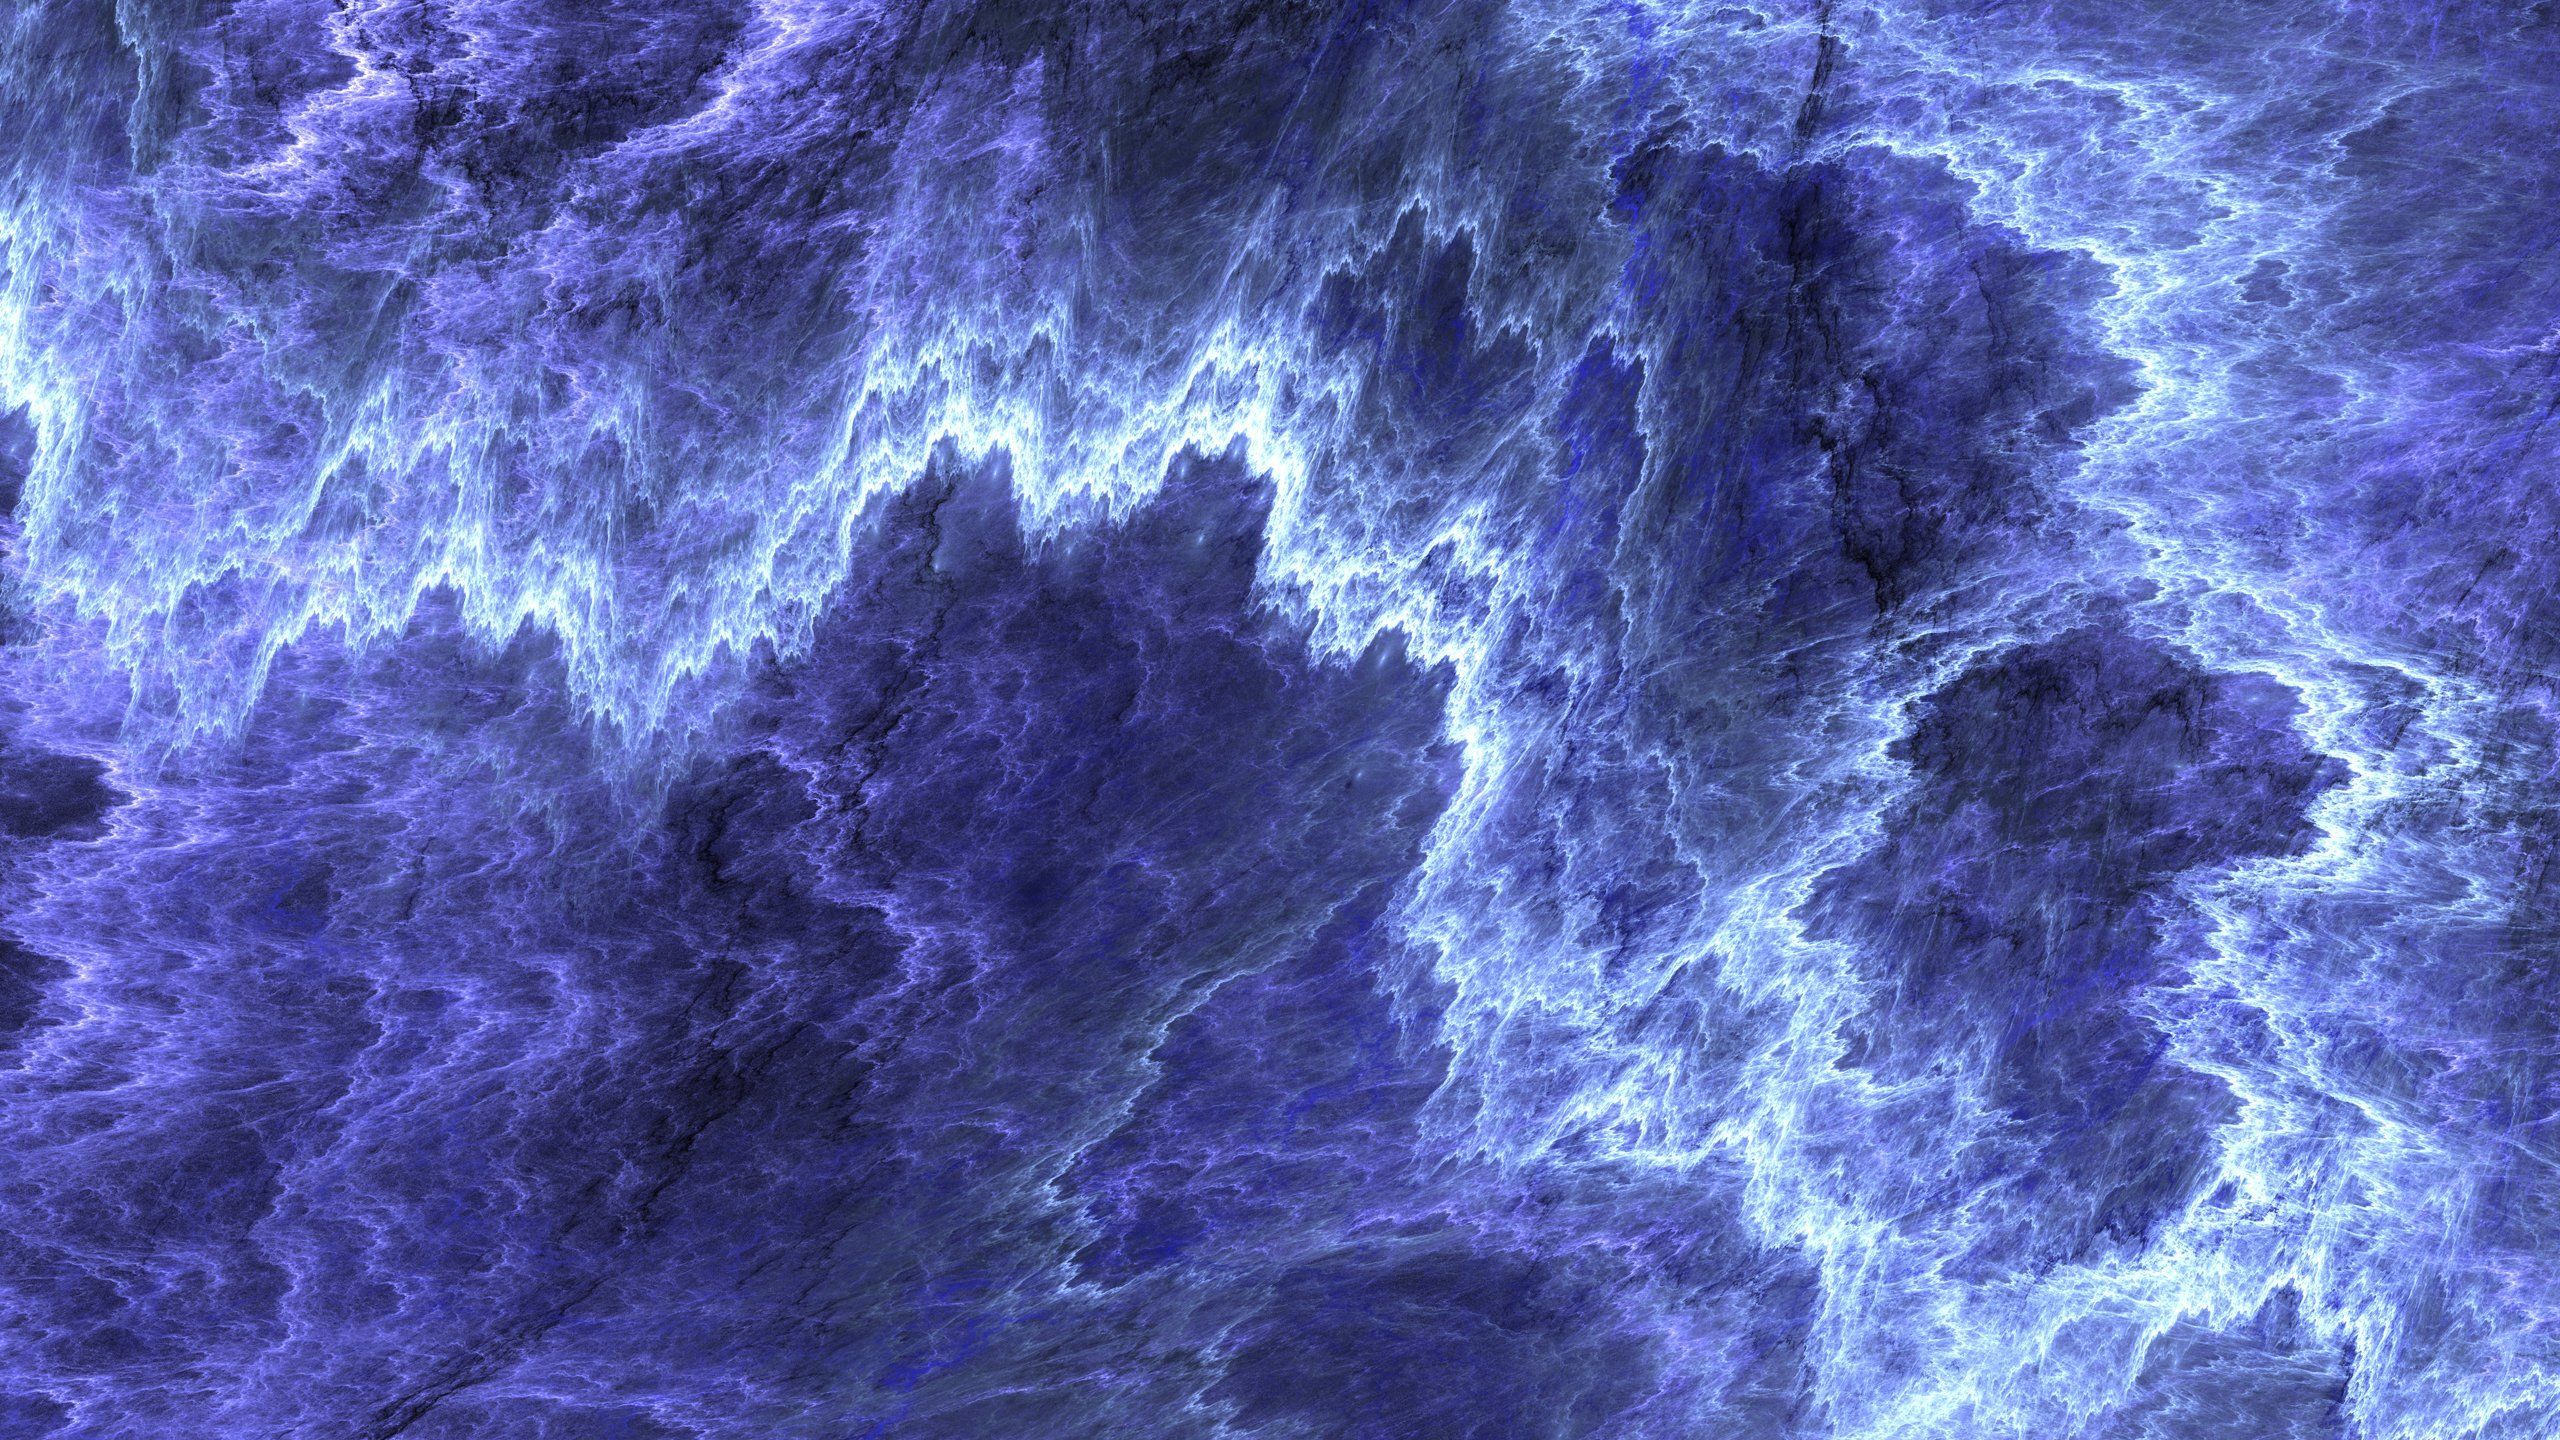 A purple and blue computer generated image - 2560x1440